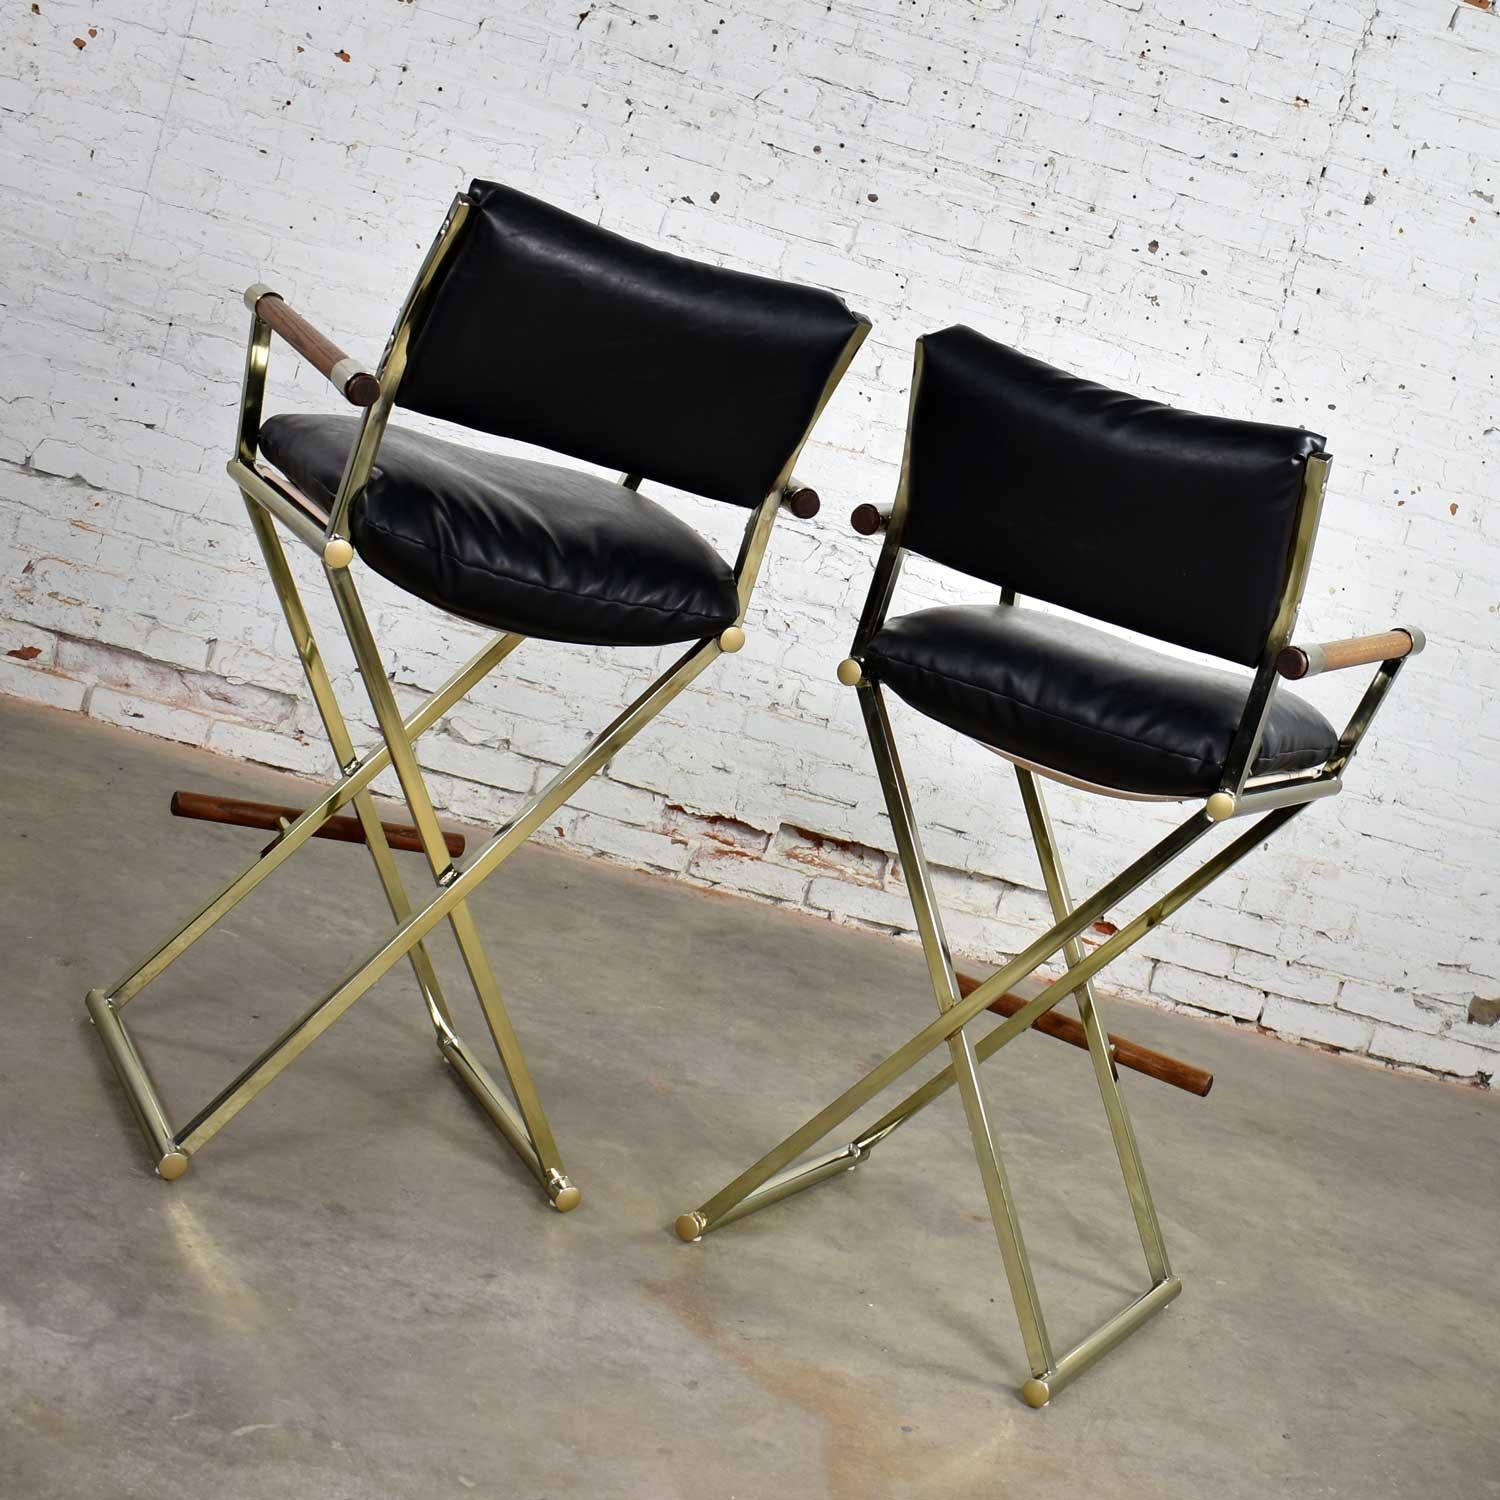 Plated Vintage Pair of Directors Chair Style Bar Stools Brass Plate Oak and Black Vinyl